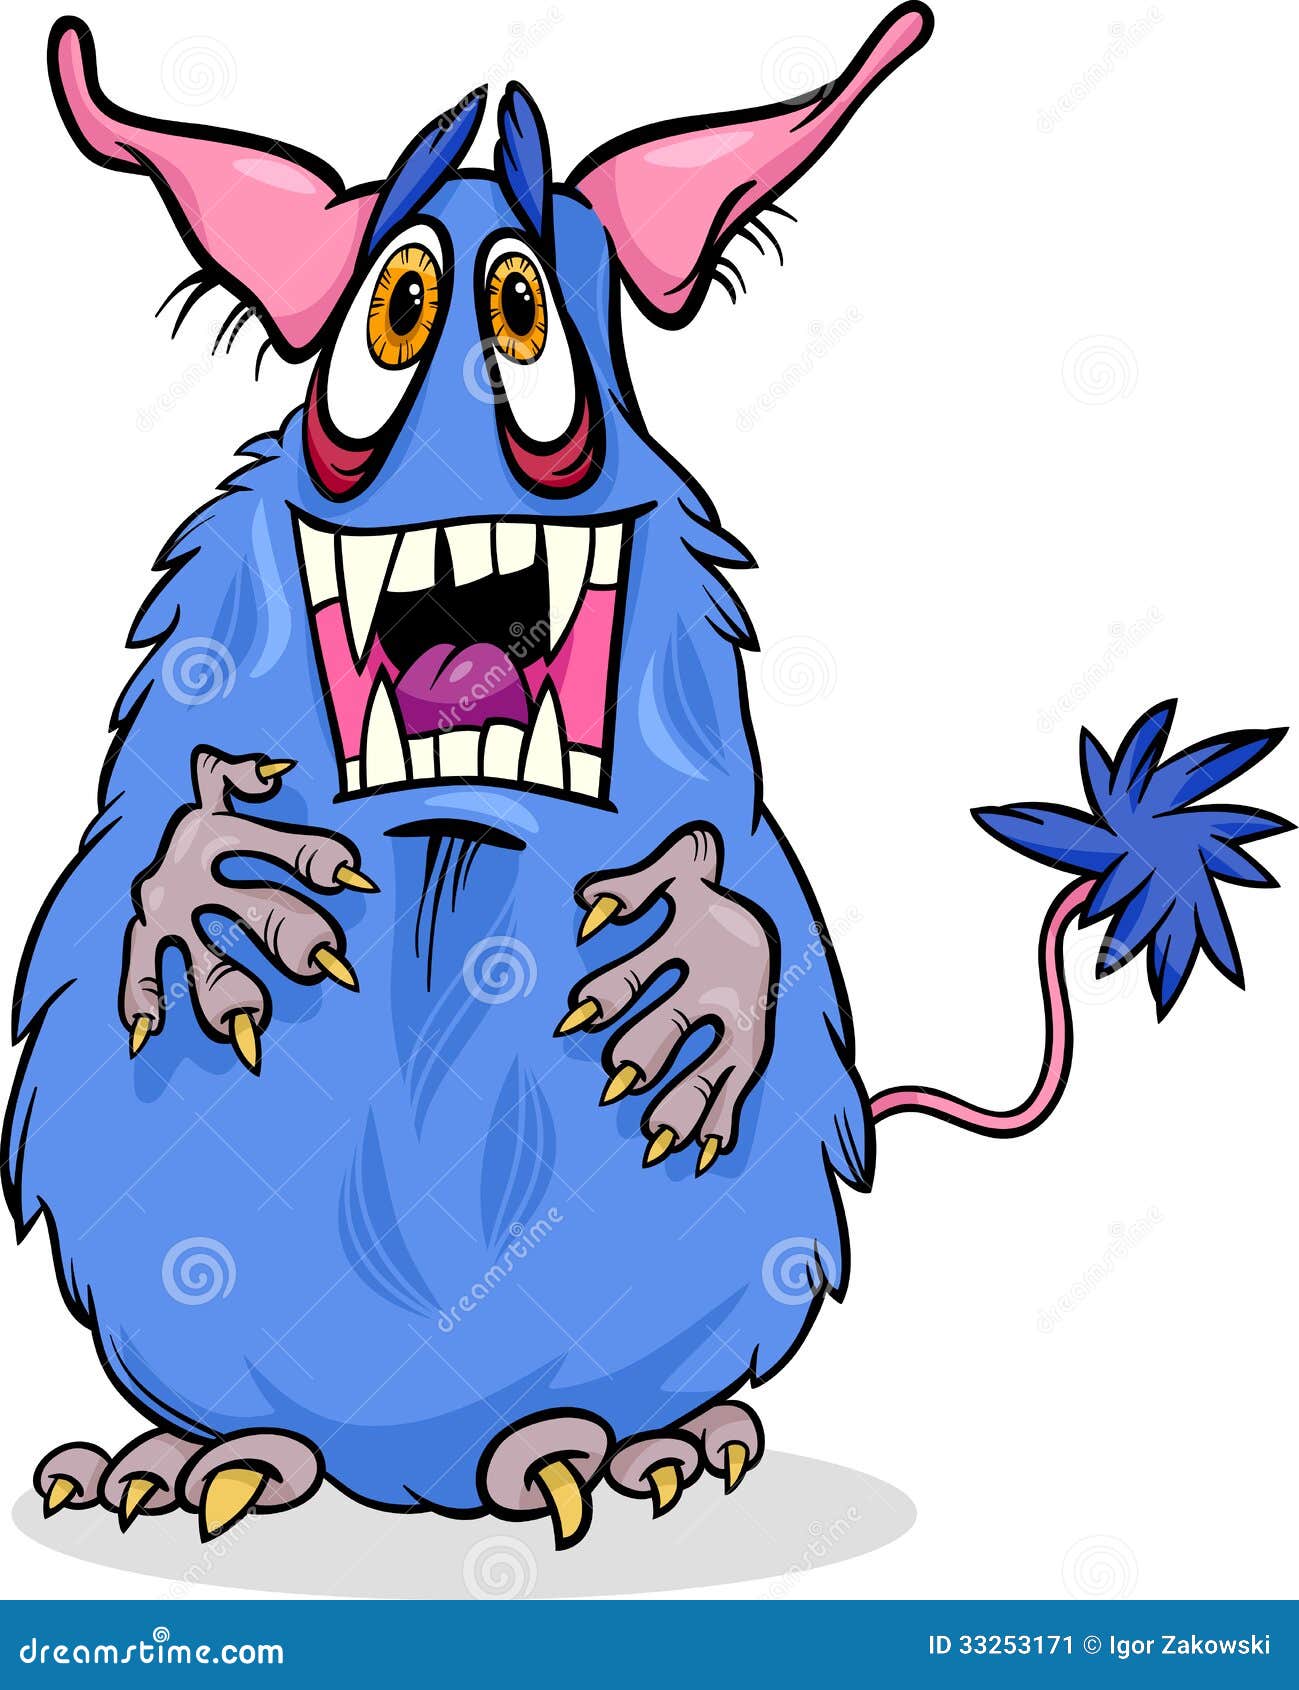 funny monster clipart - photo #36